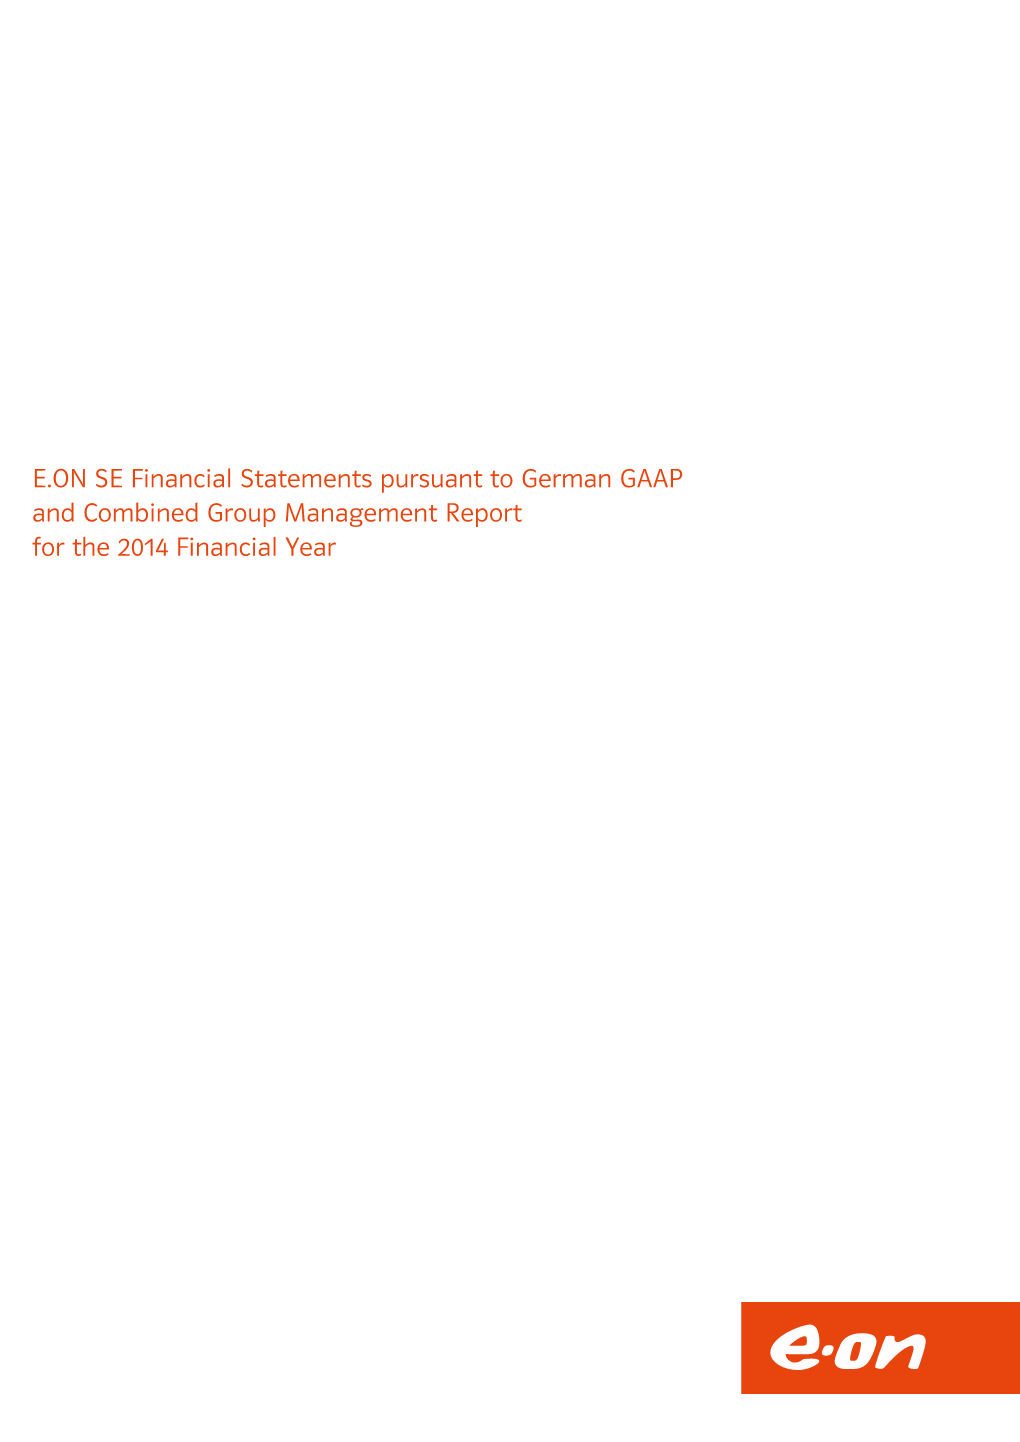 E.ON SE Financial Statements Pursuant to German GAAP E.ON 2014